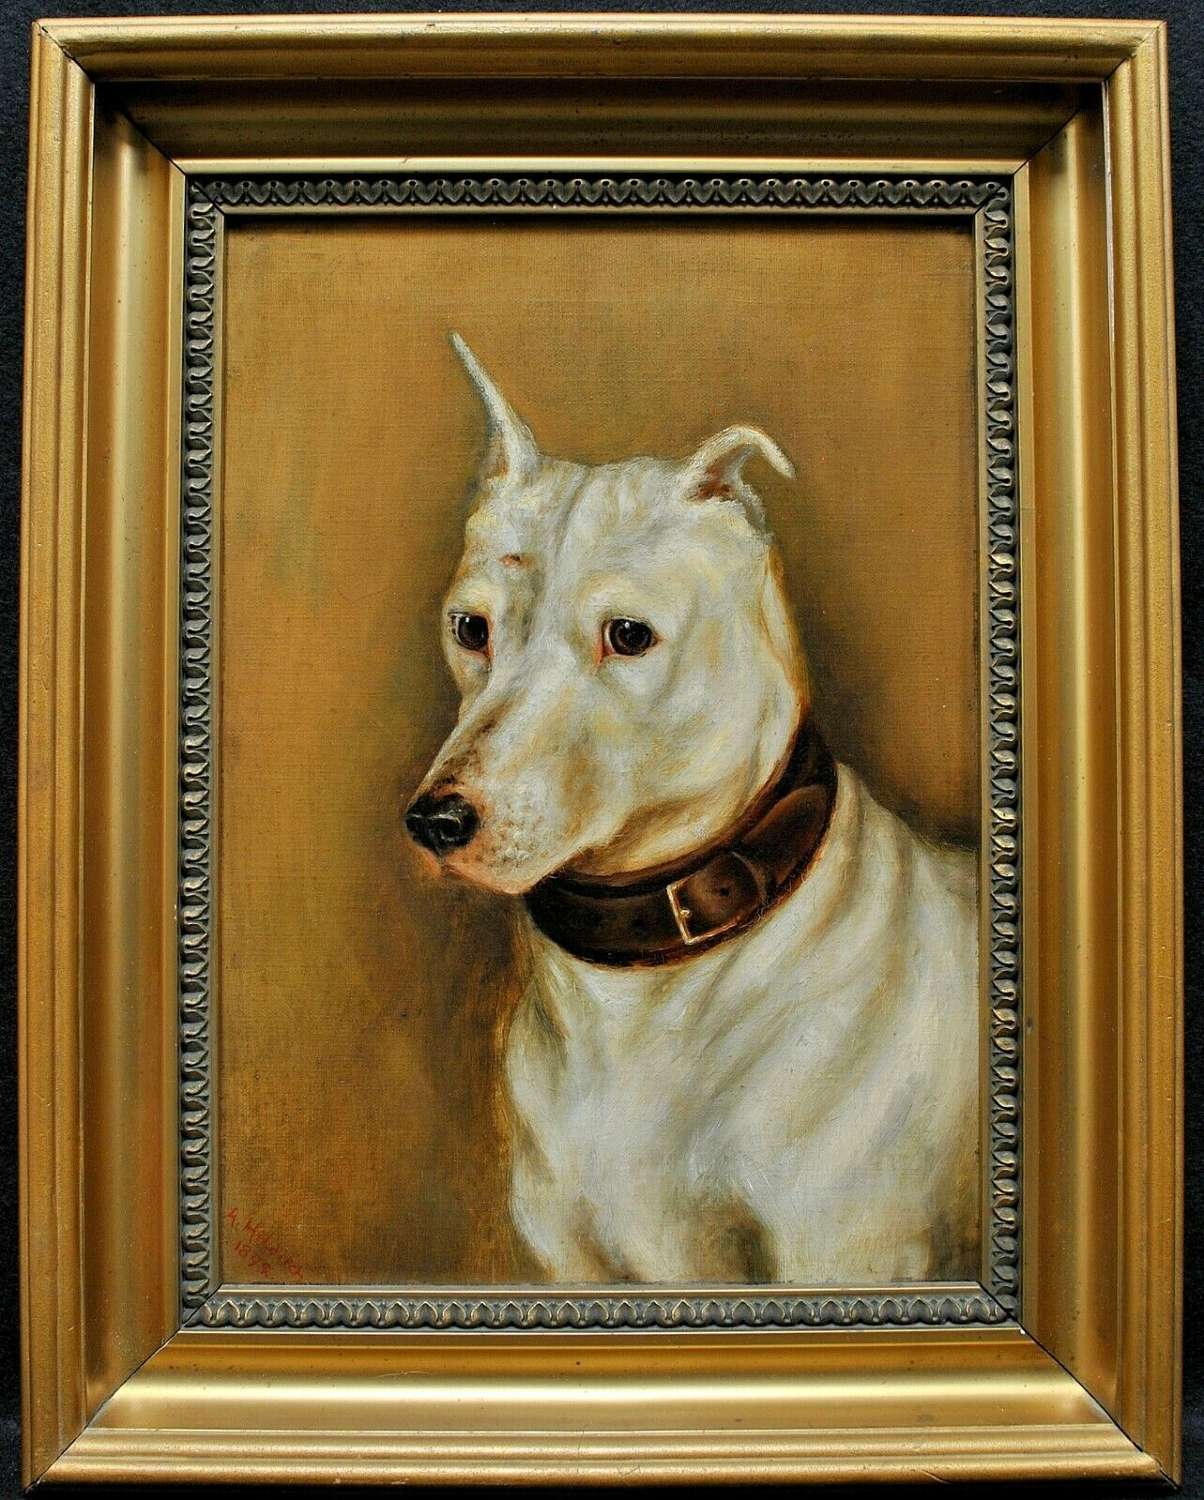 19th CENTURY OIL CANVAS PORTRAIT OF WHITE ENGLISH TERRIER DOG PAINTING